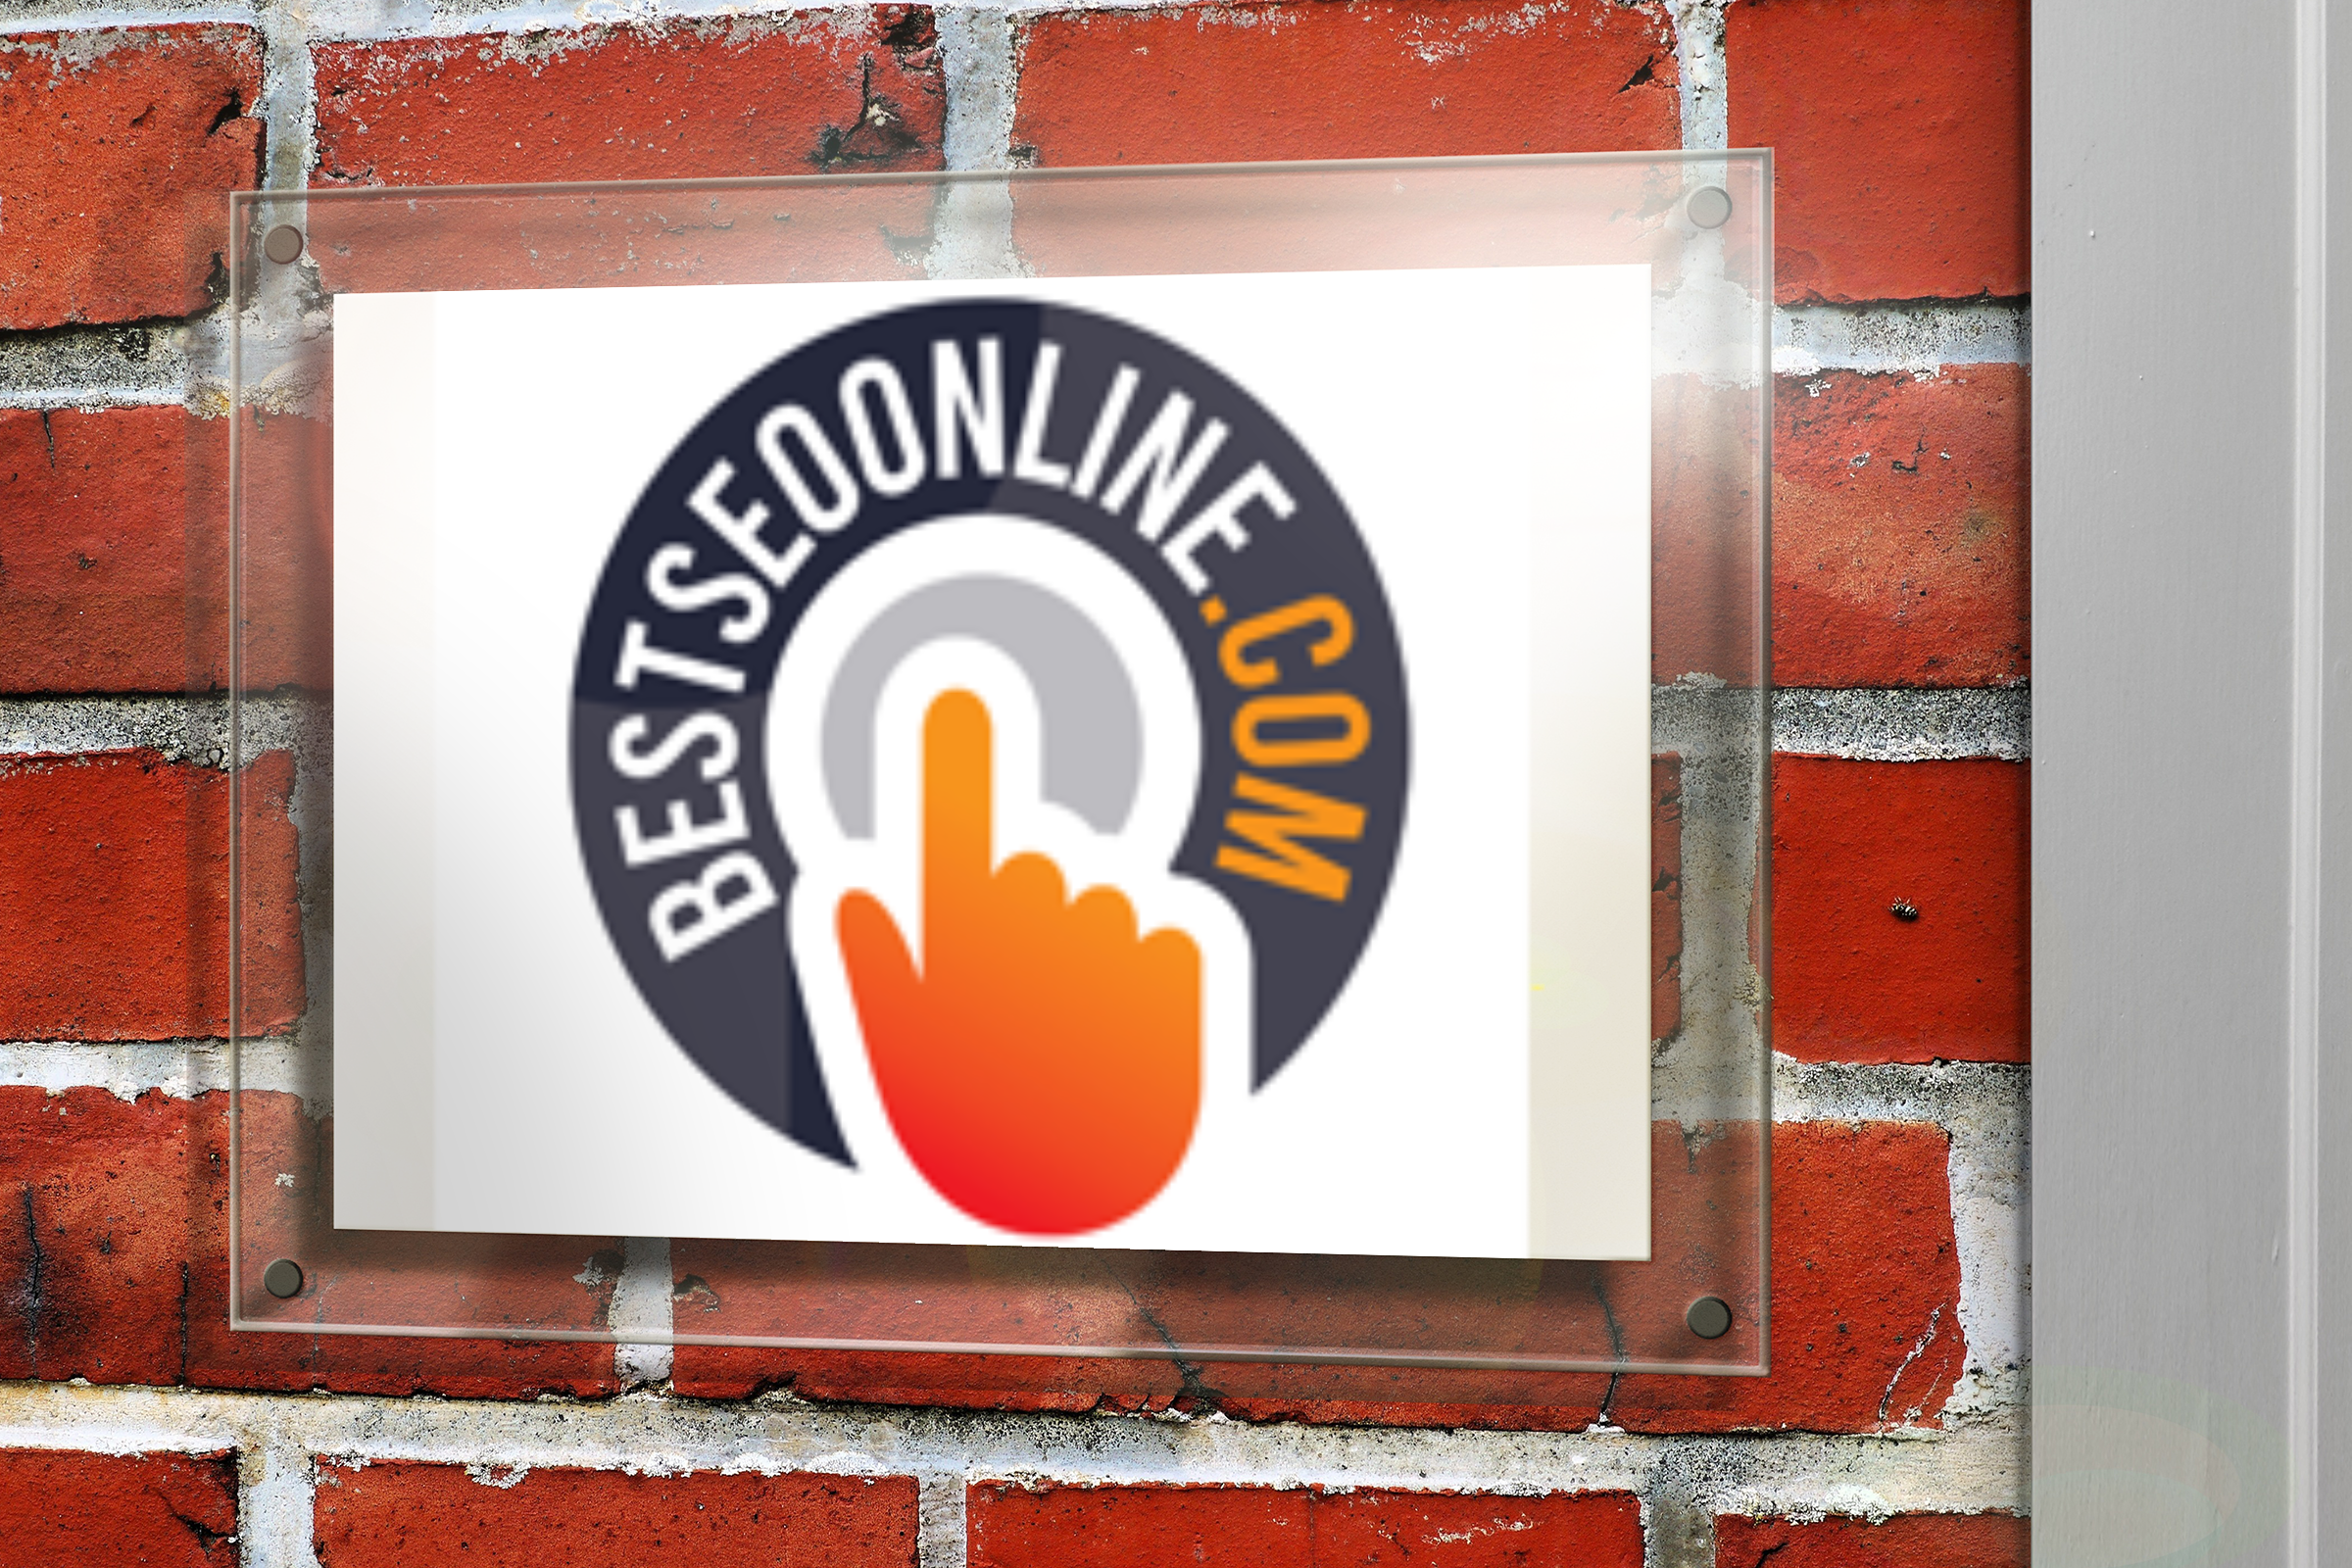 BEST SEO ONLINE is reaching out to Myrtle Beach business owners to help.